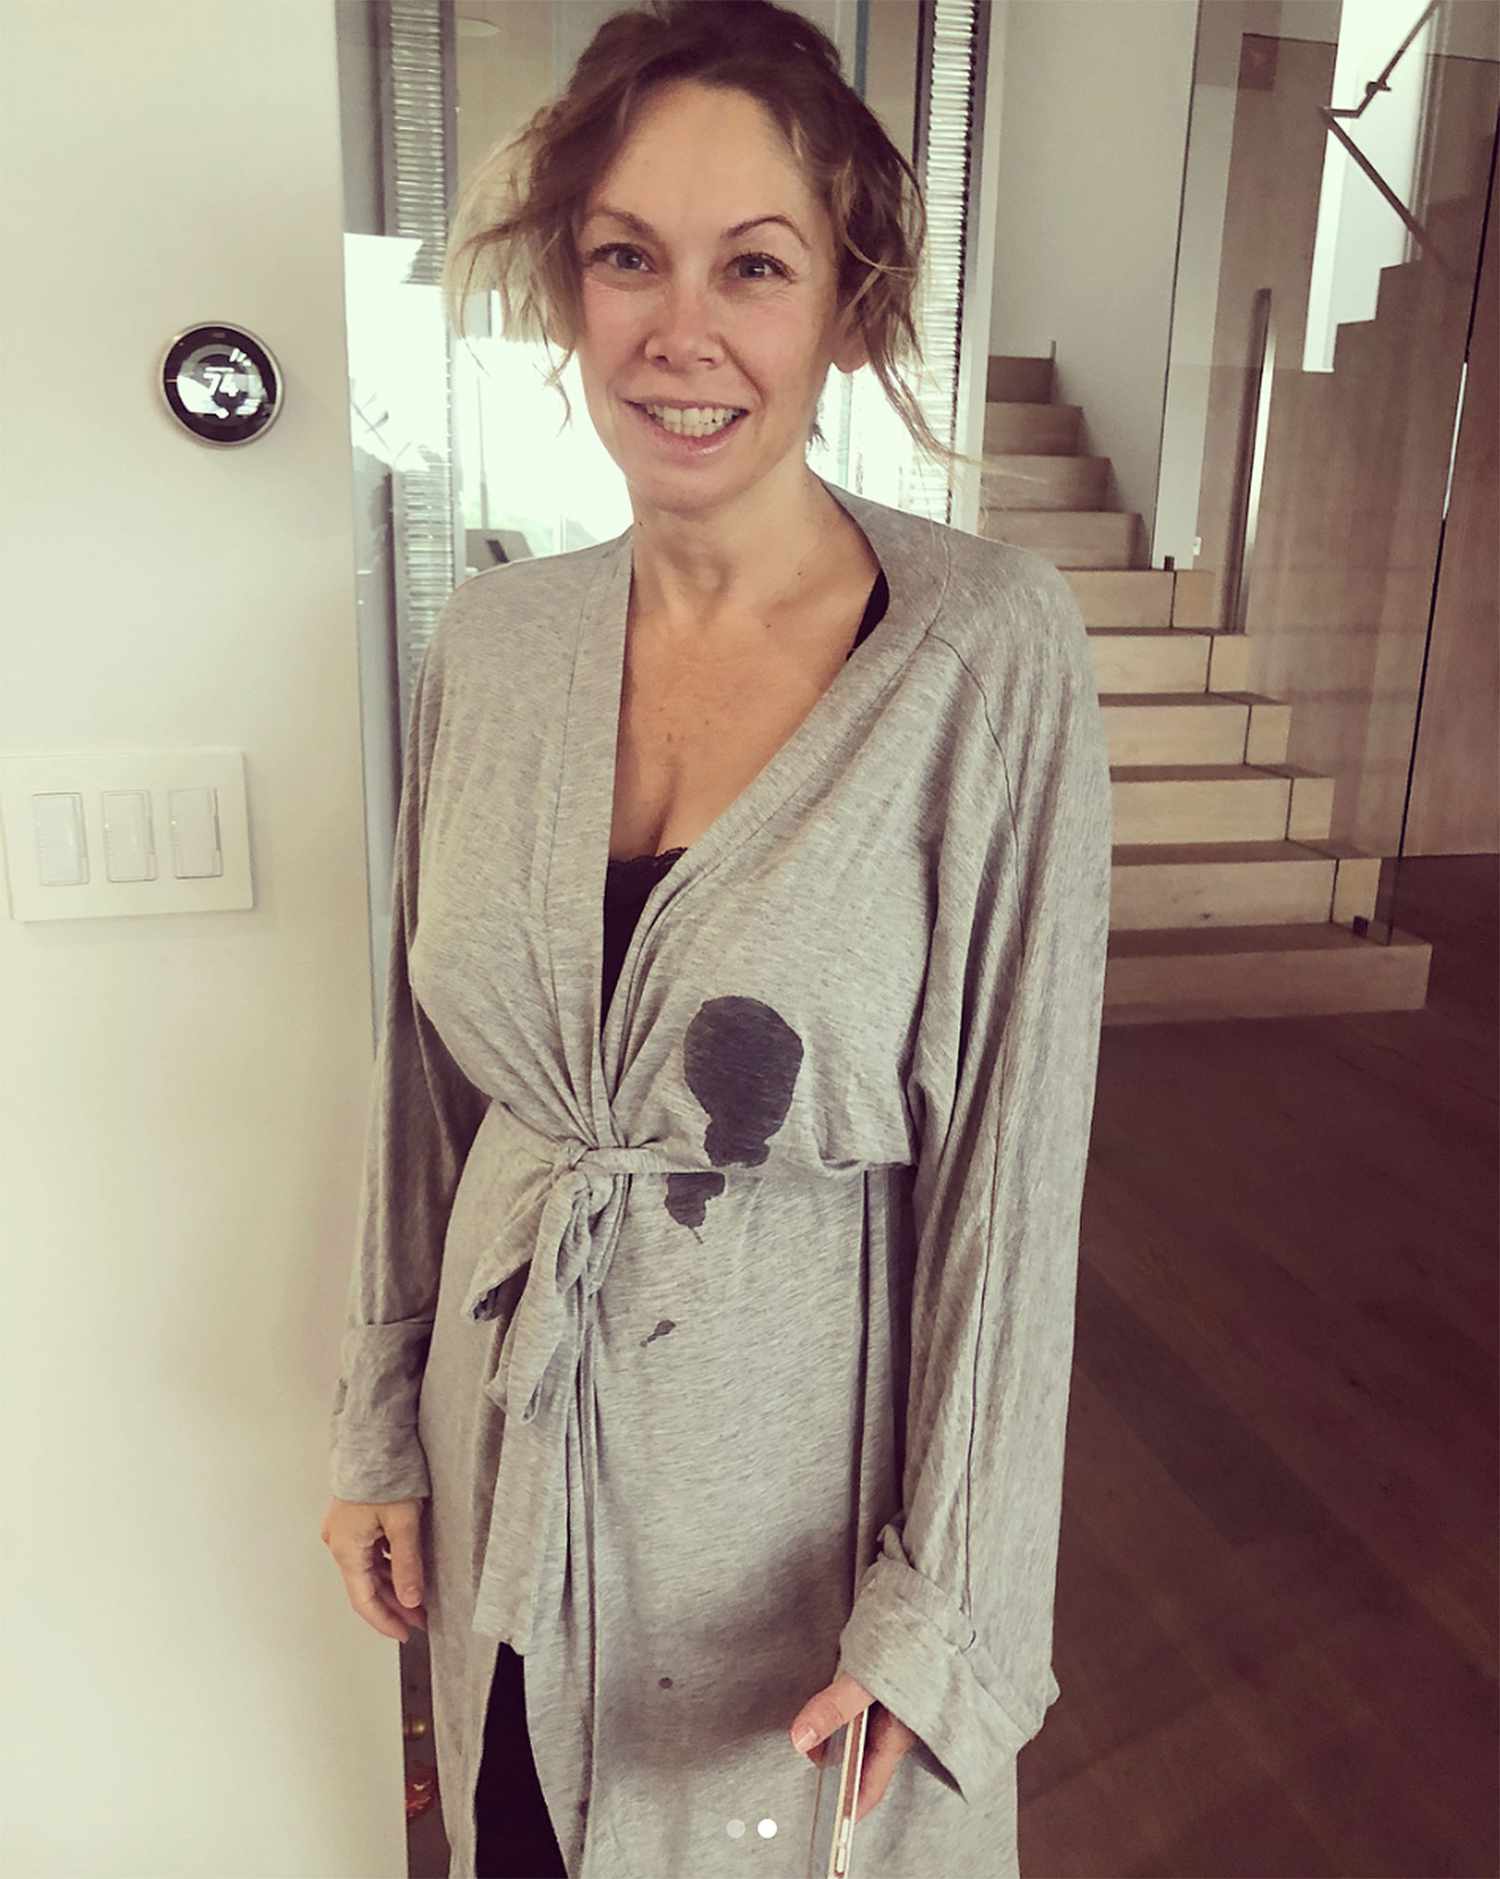 KYM JOHNSON HERJAVEC WITH A 'VERY REAL NEW MOM' MOMENT